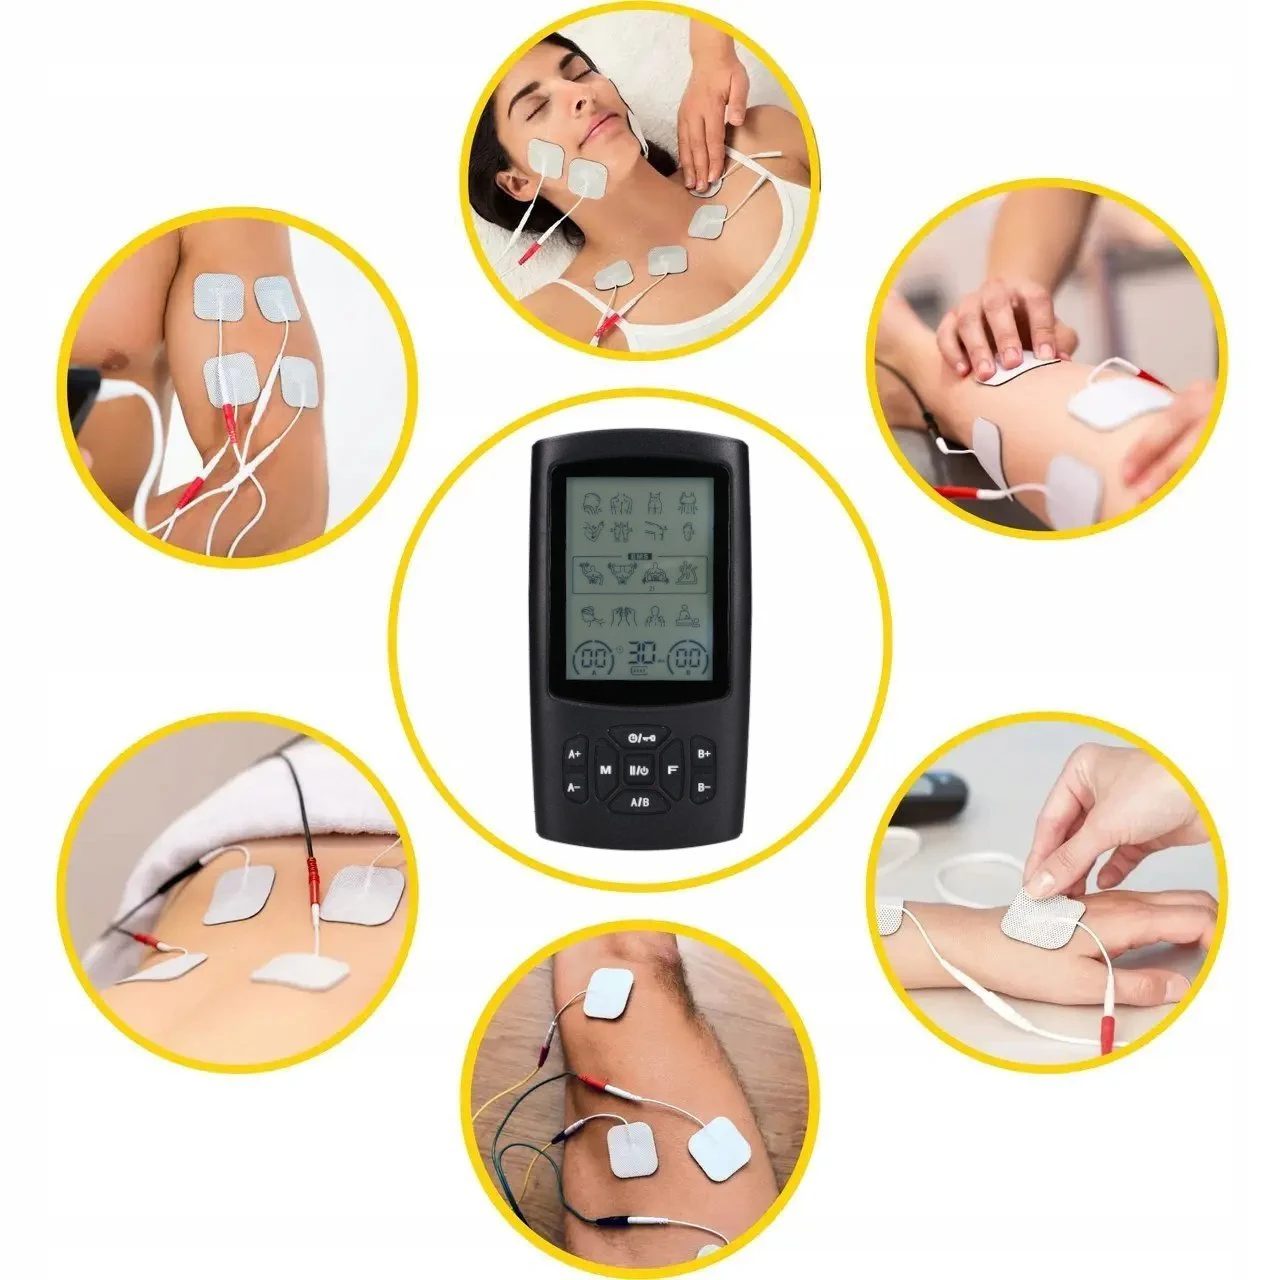 EXTRALINK VITAL ESSENTIAL MUSCLE AND NERVE ELECTROSTIMULATOR - TENS AND EMS